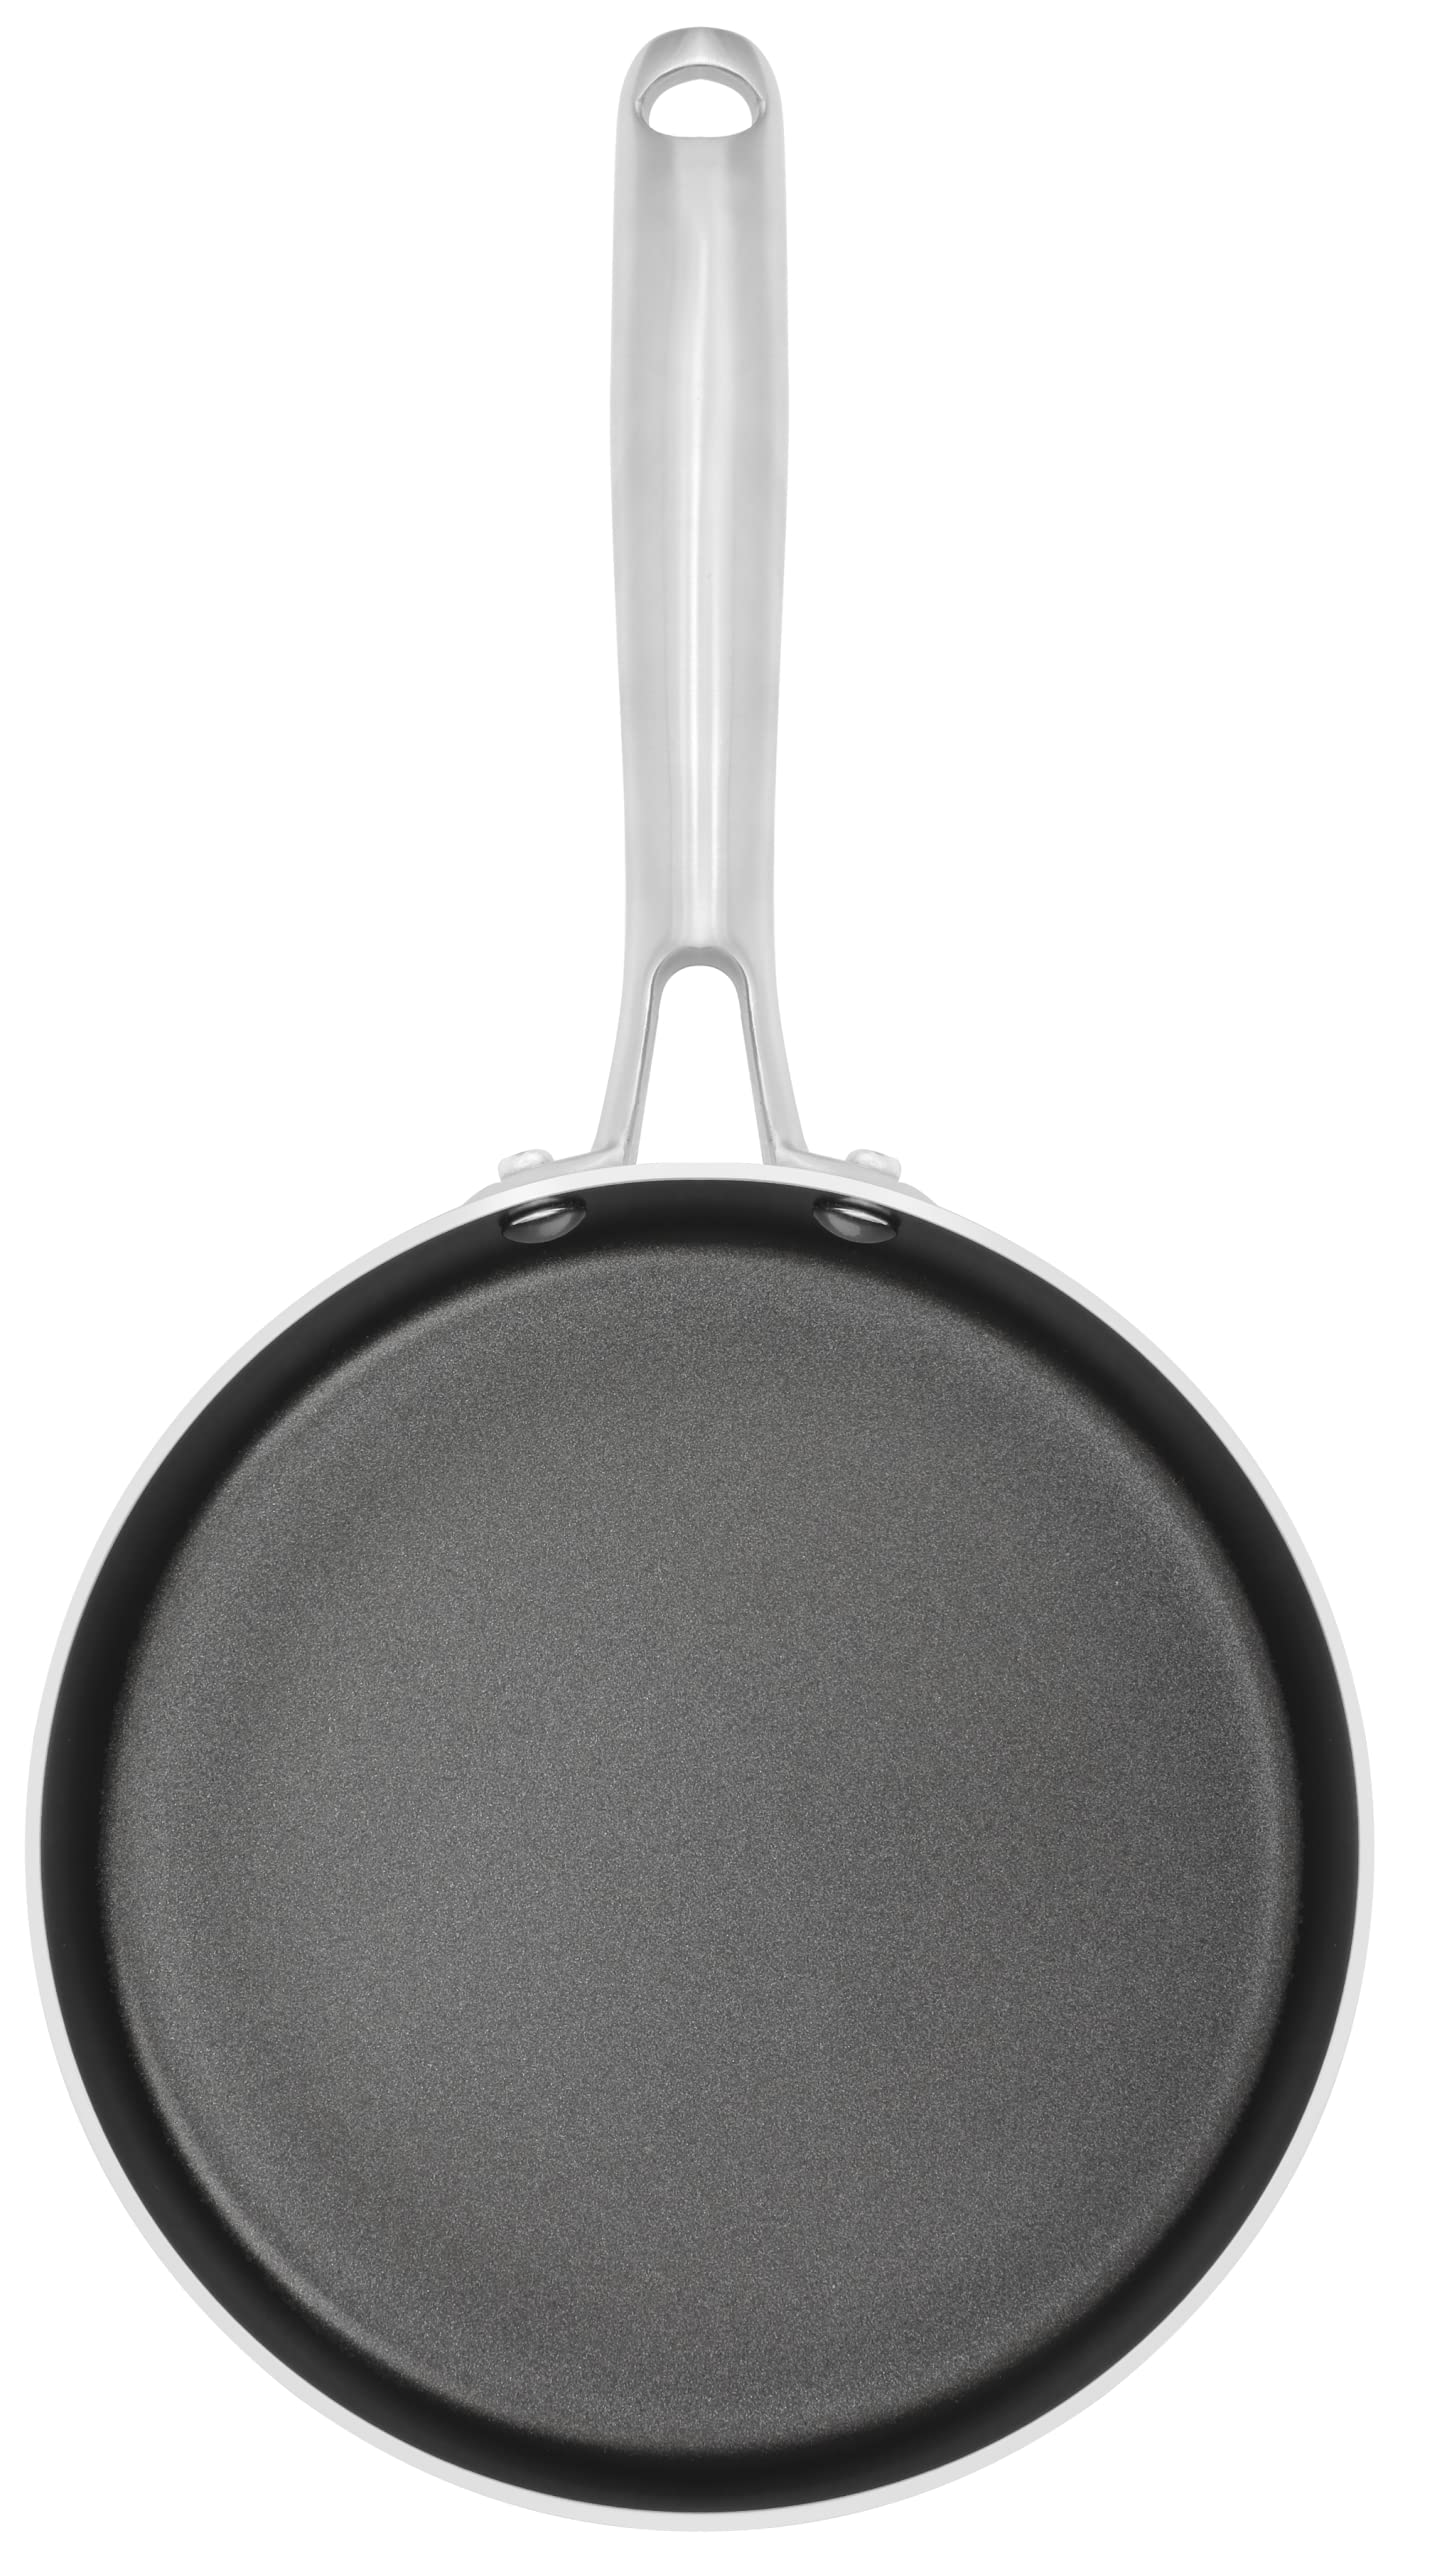 Dr.HOWS SHINE Nonstick Coating Frying Pan, Wok For Induction, Electric, Halogen and Gas Cooktops, Stainless Handle, PFOA free, Dishwasher-Safe (Shine frying pan 20cm)